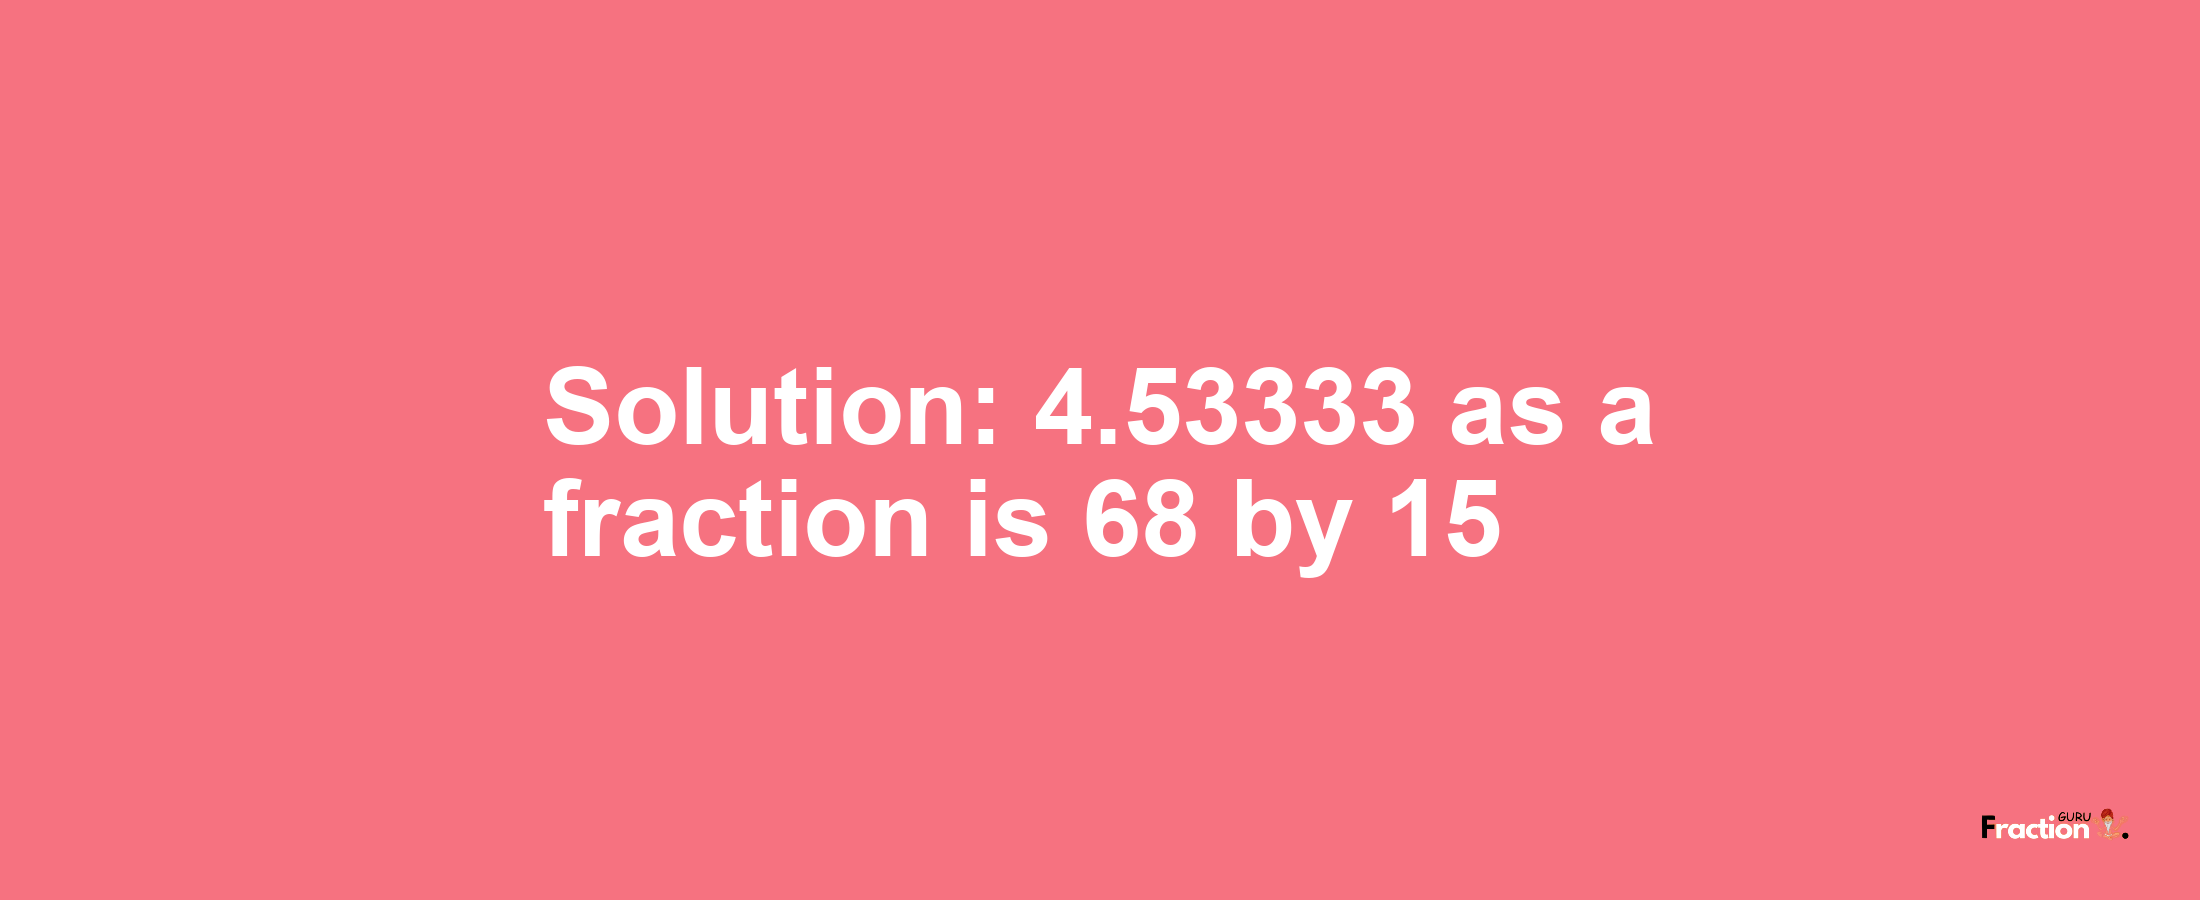 Solution:4.53333 as a fraction is 68/15